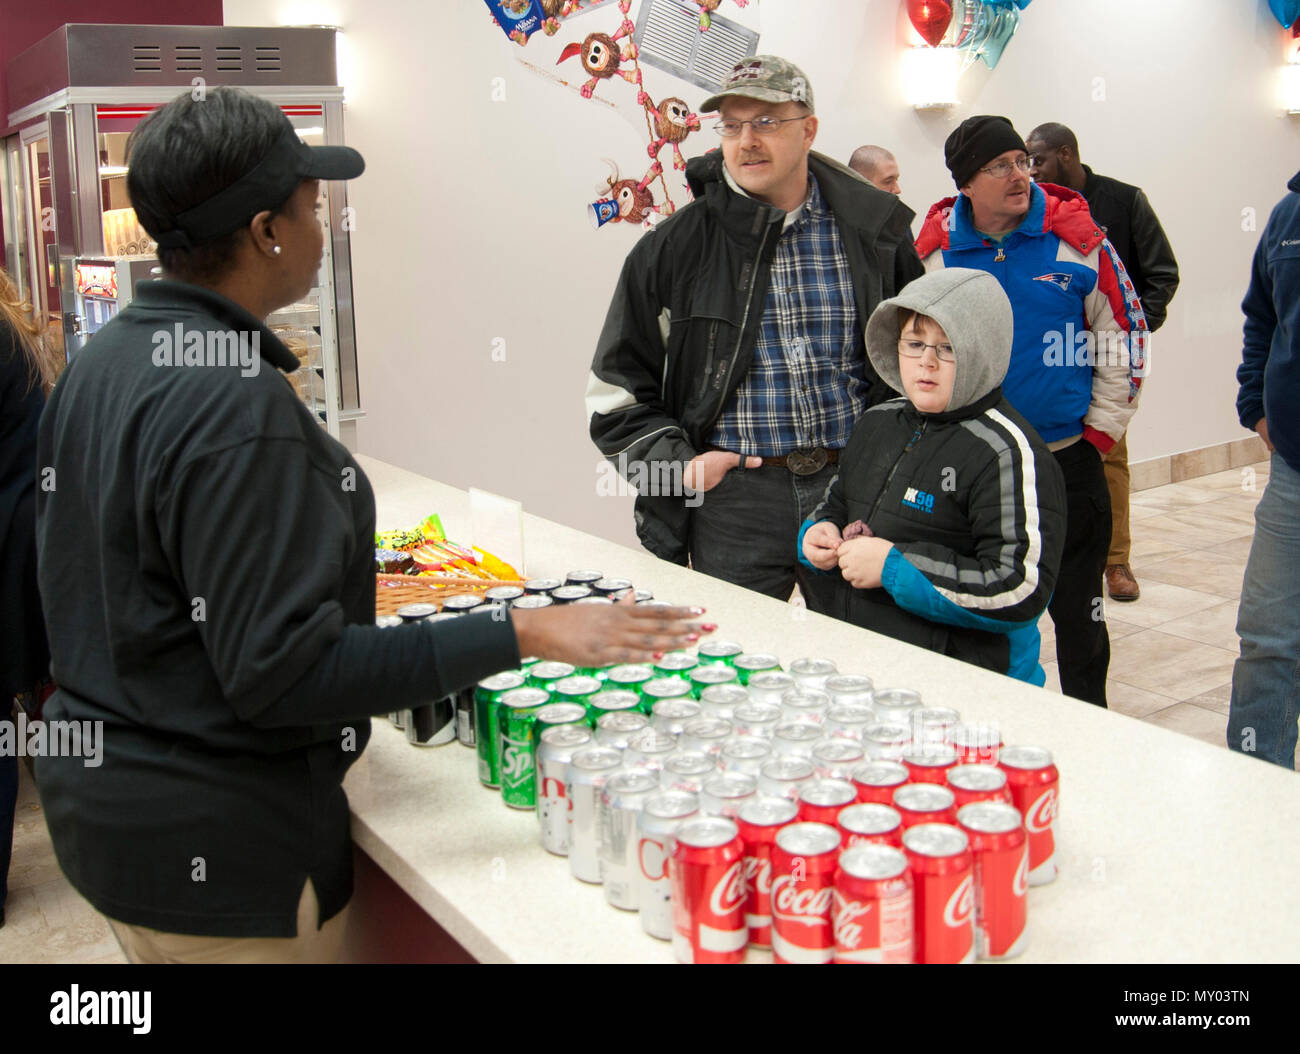 Master Sgt. Robert Bedwell (third from left), Air National Guard Bureau Command Post training and standardization manager, and his son, Connor, place an order with Shavown Brown, movie theater attendant, at the movie theater concession stand at Joint Base Andrews, Md., Dec. 16, 2016. The theater will close again late January 2017 so new seats can be installed before the grand opening the following month. (U.S. Air Force photo by Staff Sgt. Joe Yanik) Stock Photo